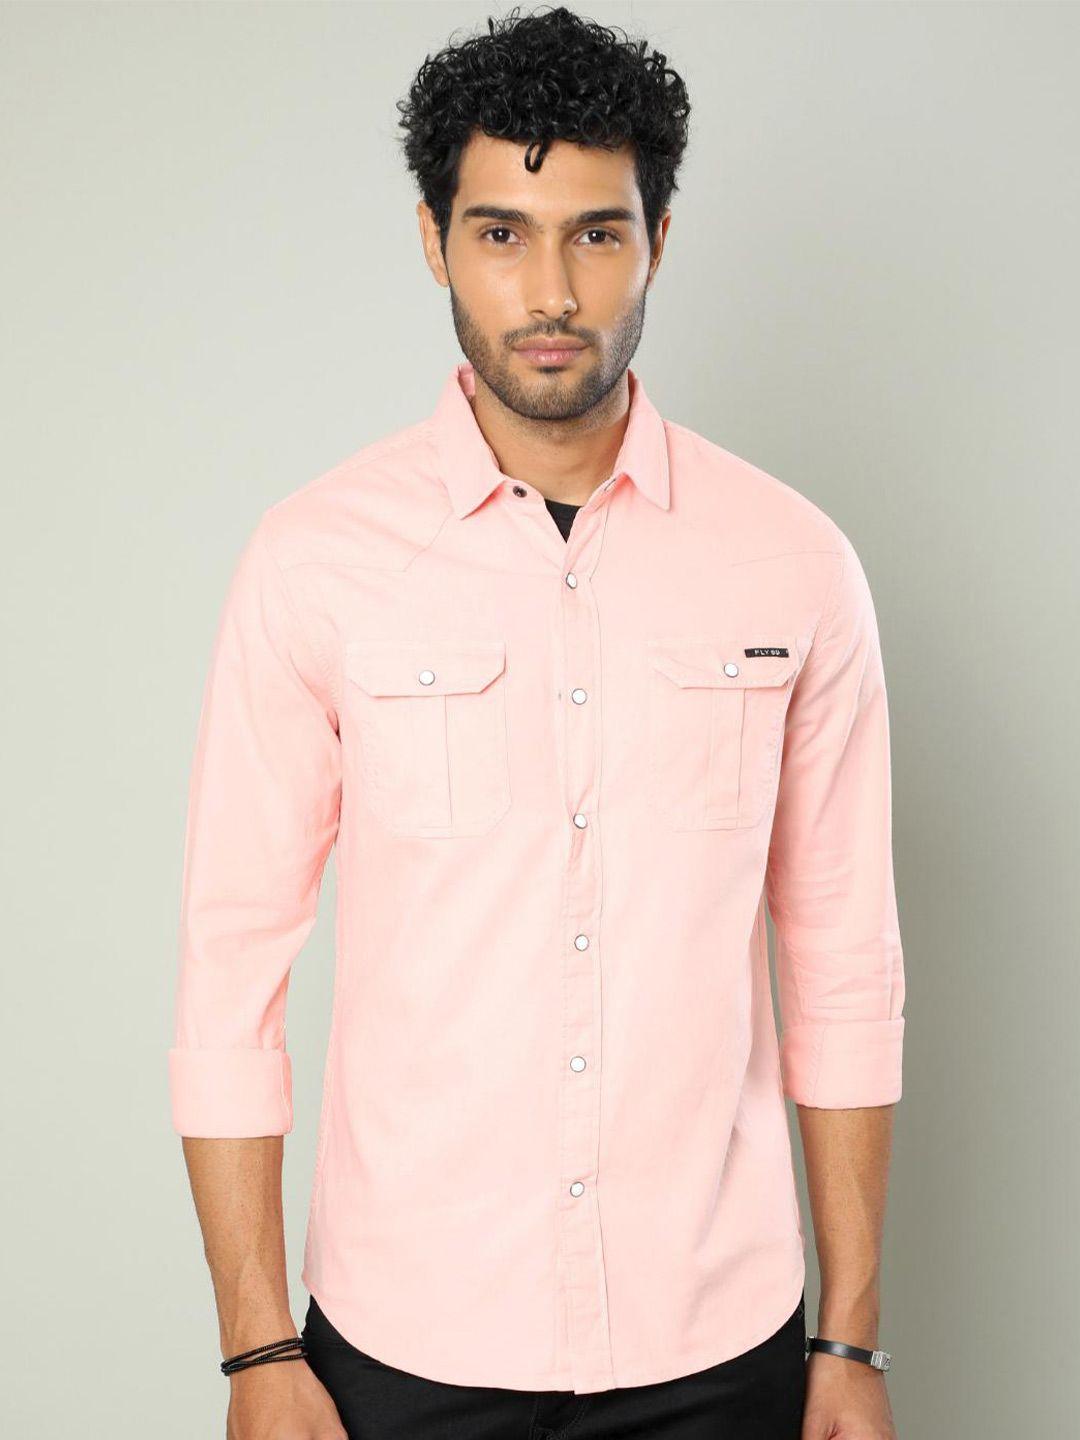 fly 69 premium slim fit pure cotton casual shirt